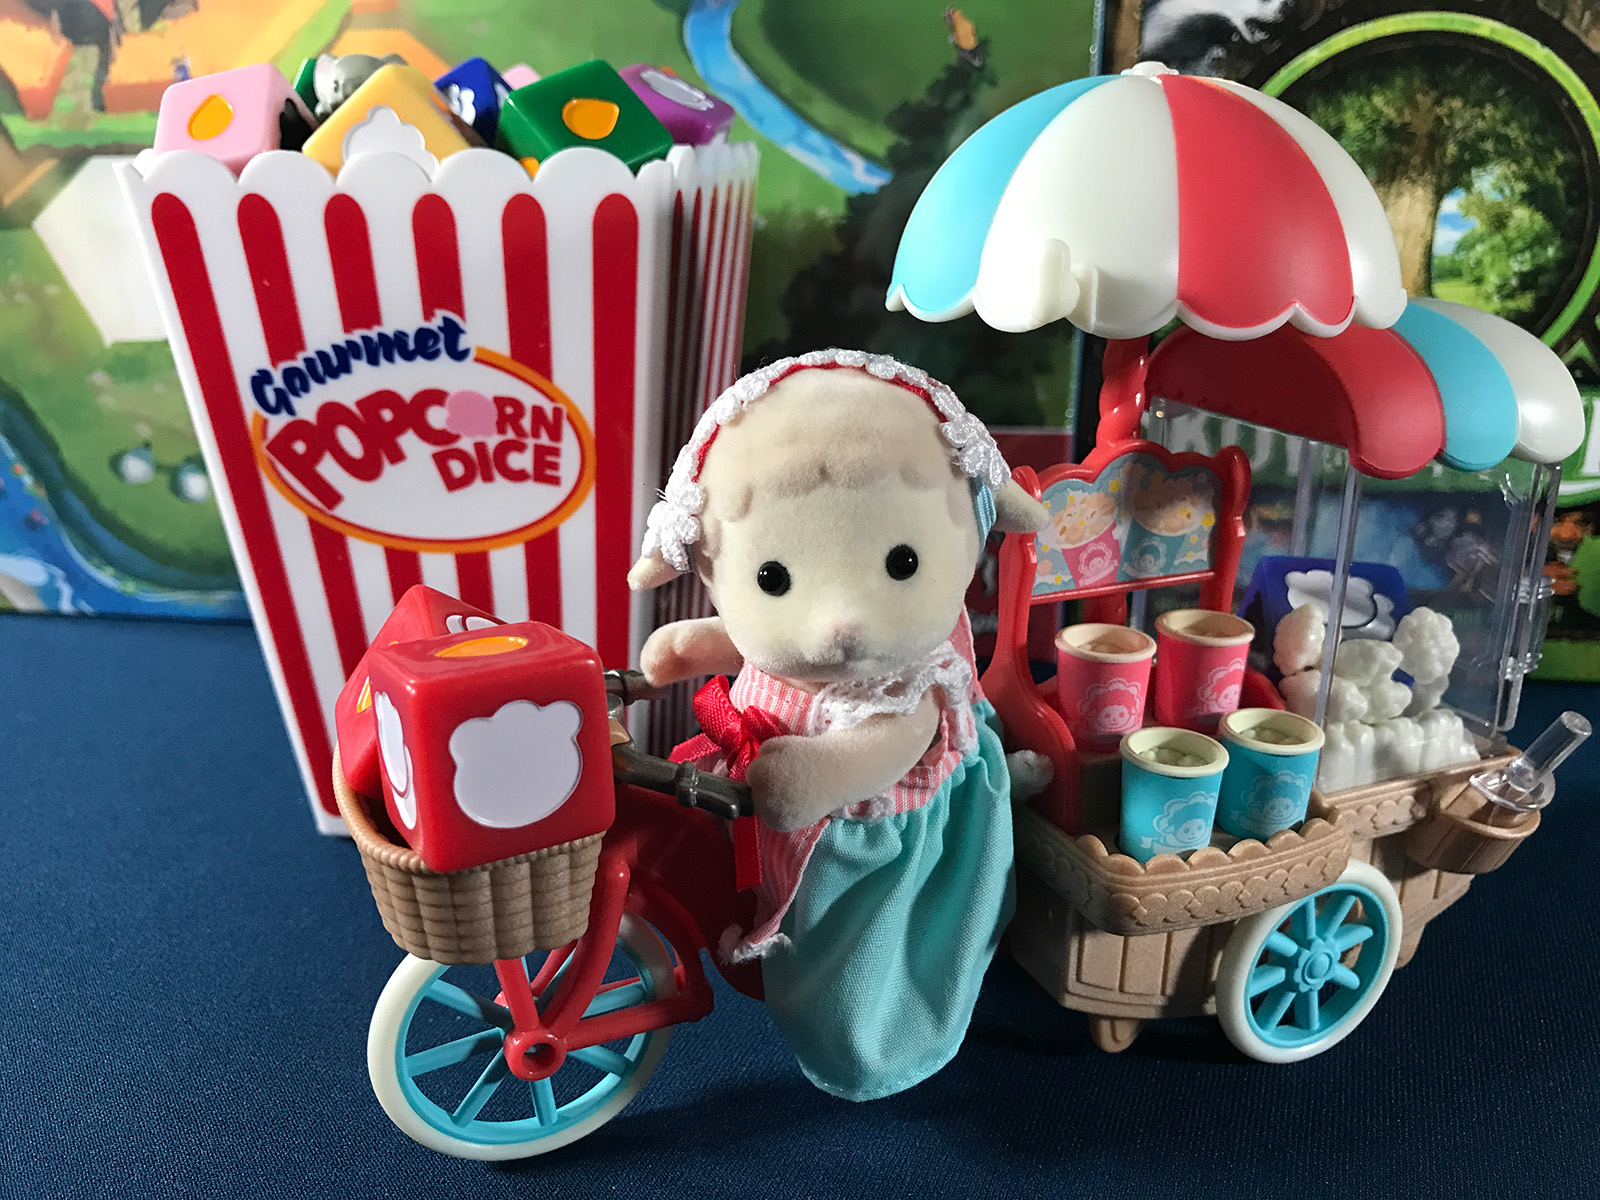 Getting Shown Up in the Art of Popcorn with the Popcorn Tricycle Driver and Gourmet Popcorn Dice